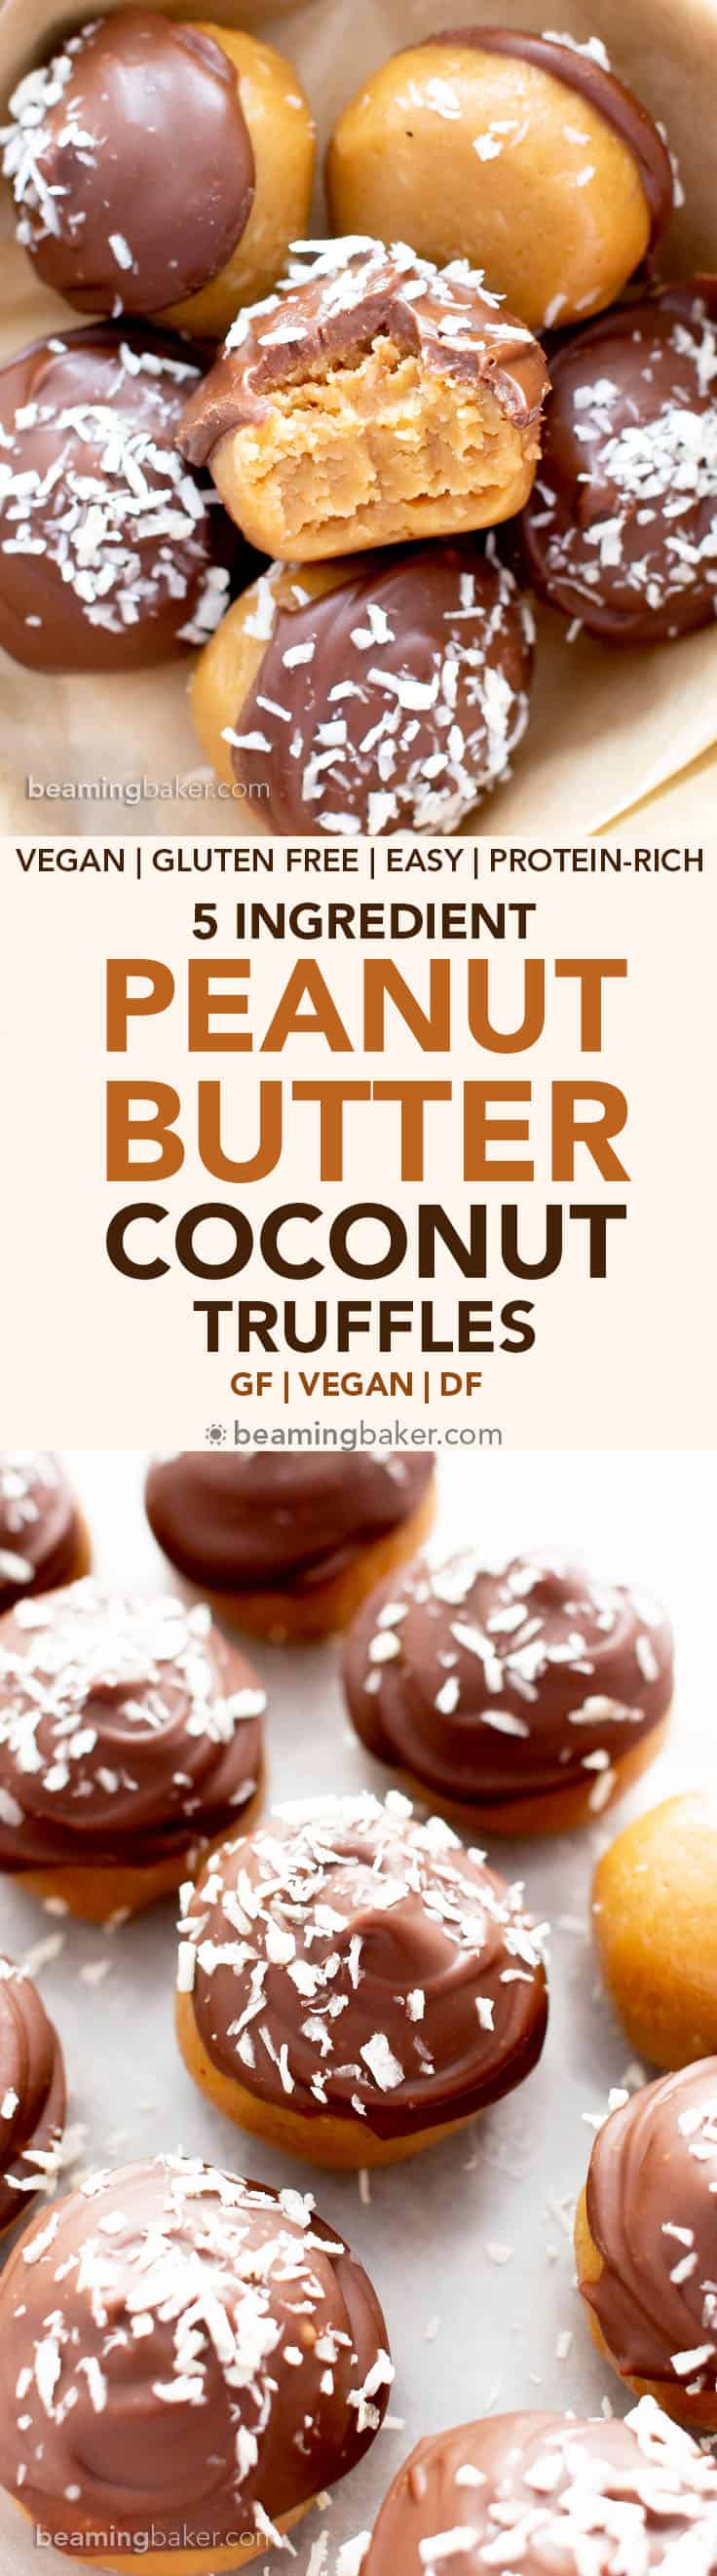 5 Ingredient Vegan Peanut Butter Coconut Truffles (V, GF): an easy recipe for decadent peanut butter coconut truffles enrobed in a thick layer of chocolate, and topped with coconut flakes. Made with healthy ingredients. #PeanutButter #HealthyDesserts #ChristmasCandy #VeganChristmas #GlutenFreeVegan #BeamingBaker #Coconut #CandyRecipe | Recipe at BeamingBaker.com